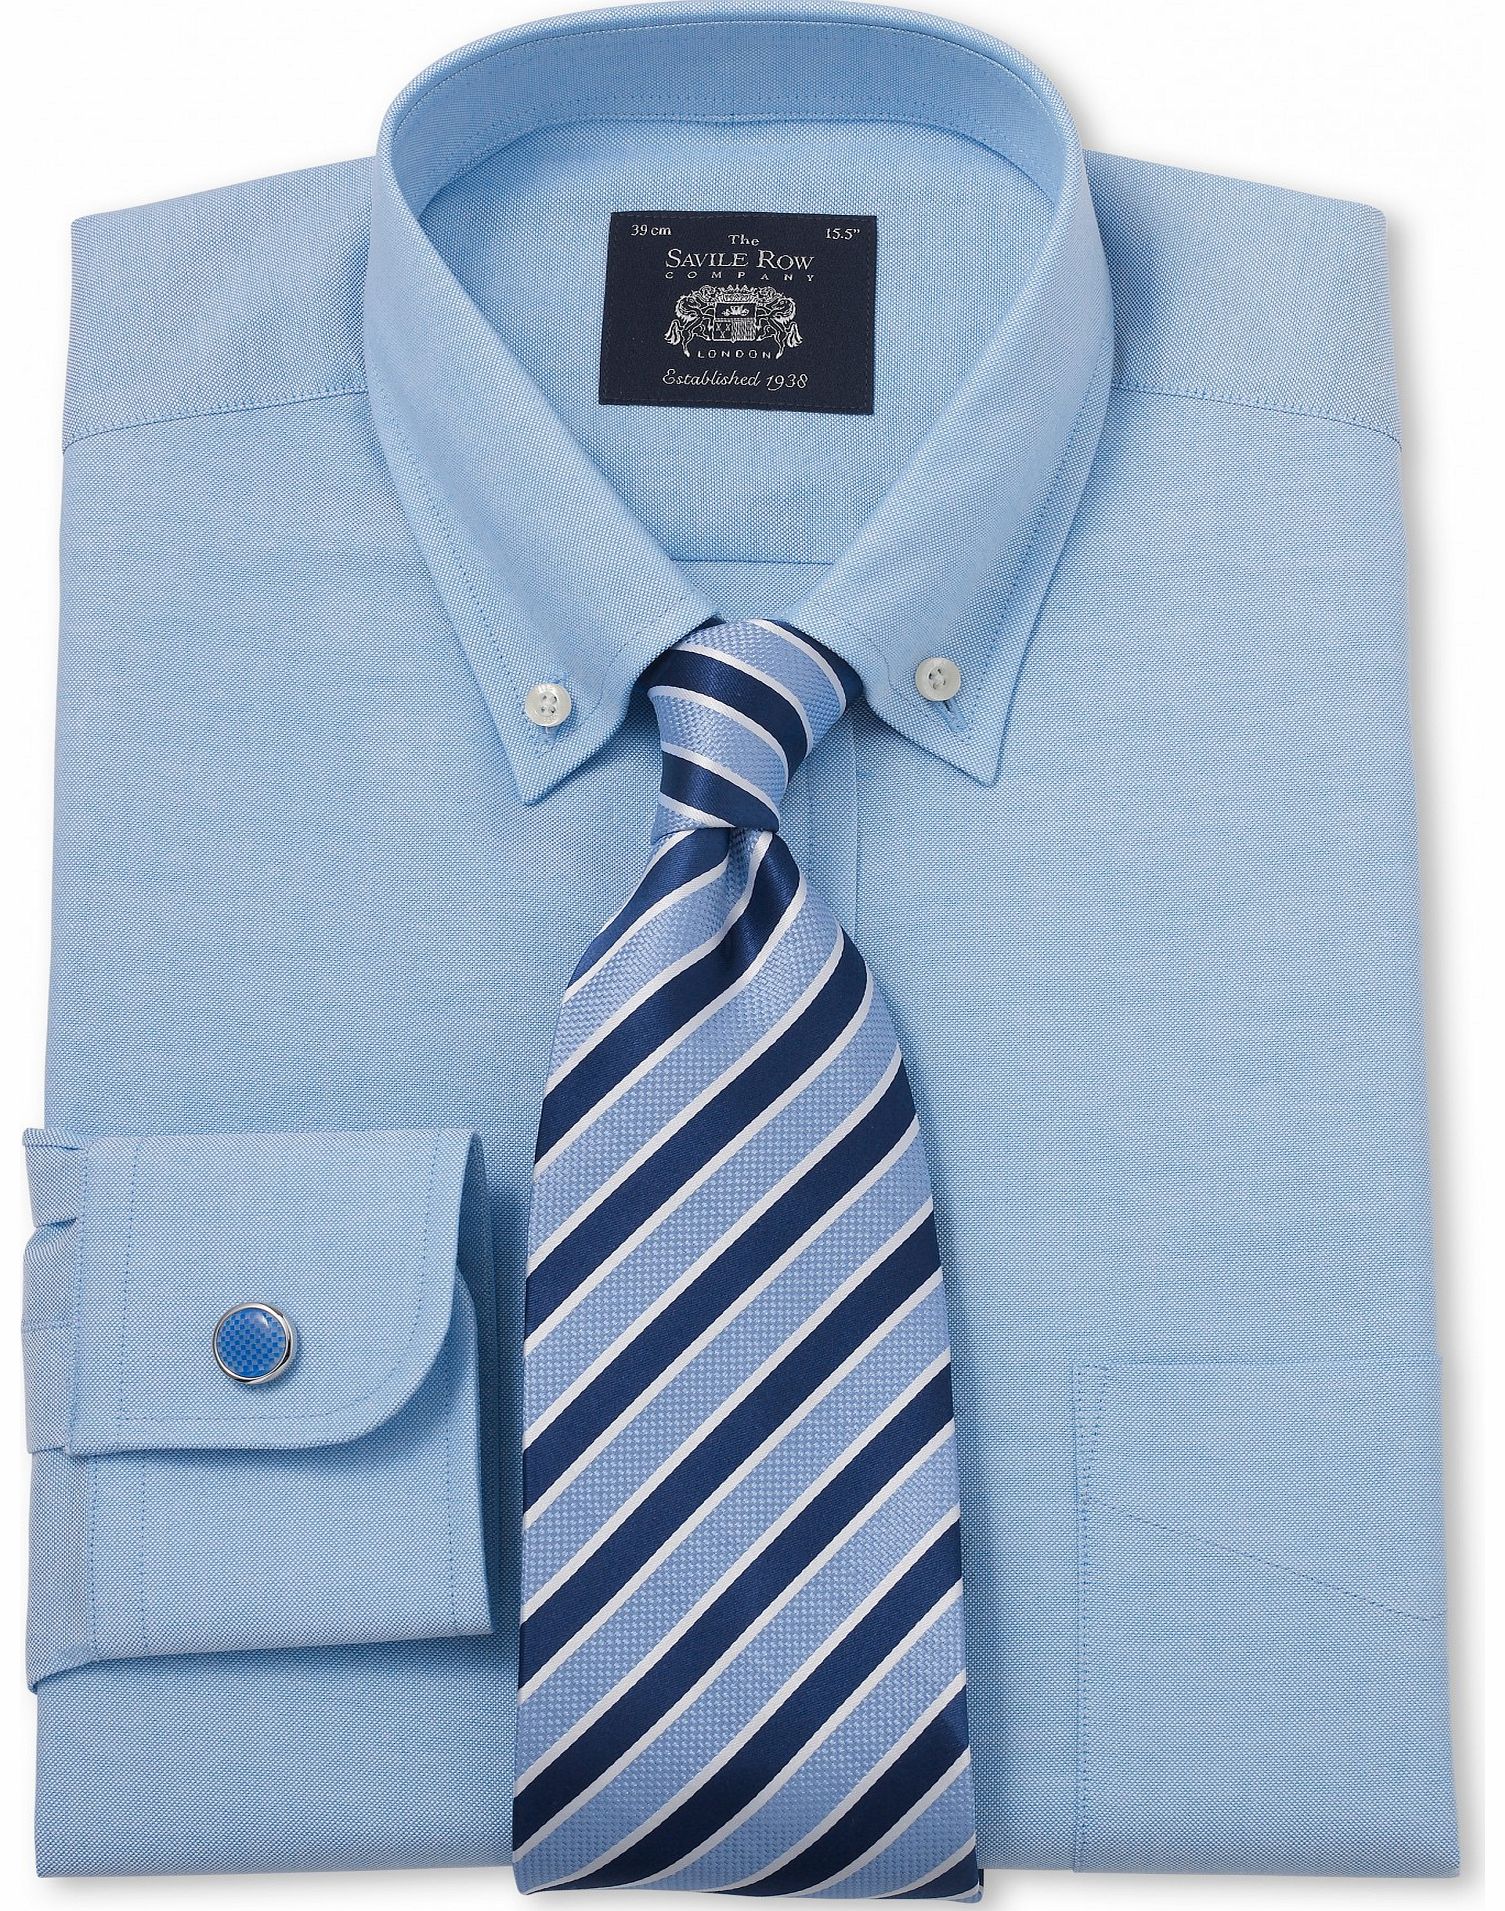 Savile Row Company Blue Pinpoint Classic Fit Shirt 15`` Lengthened